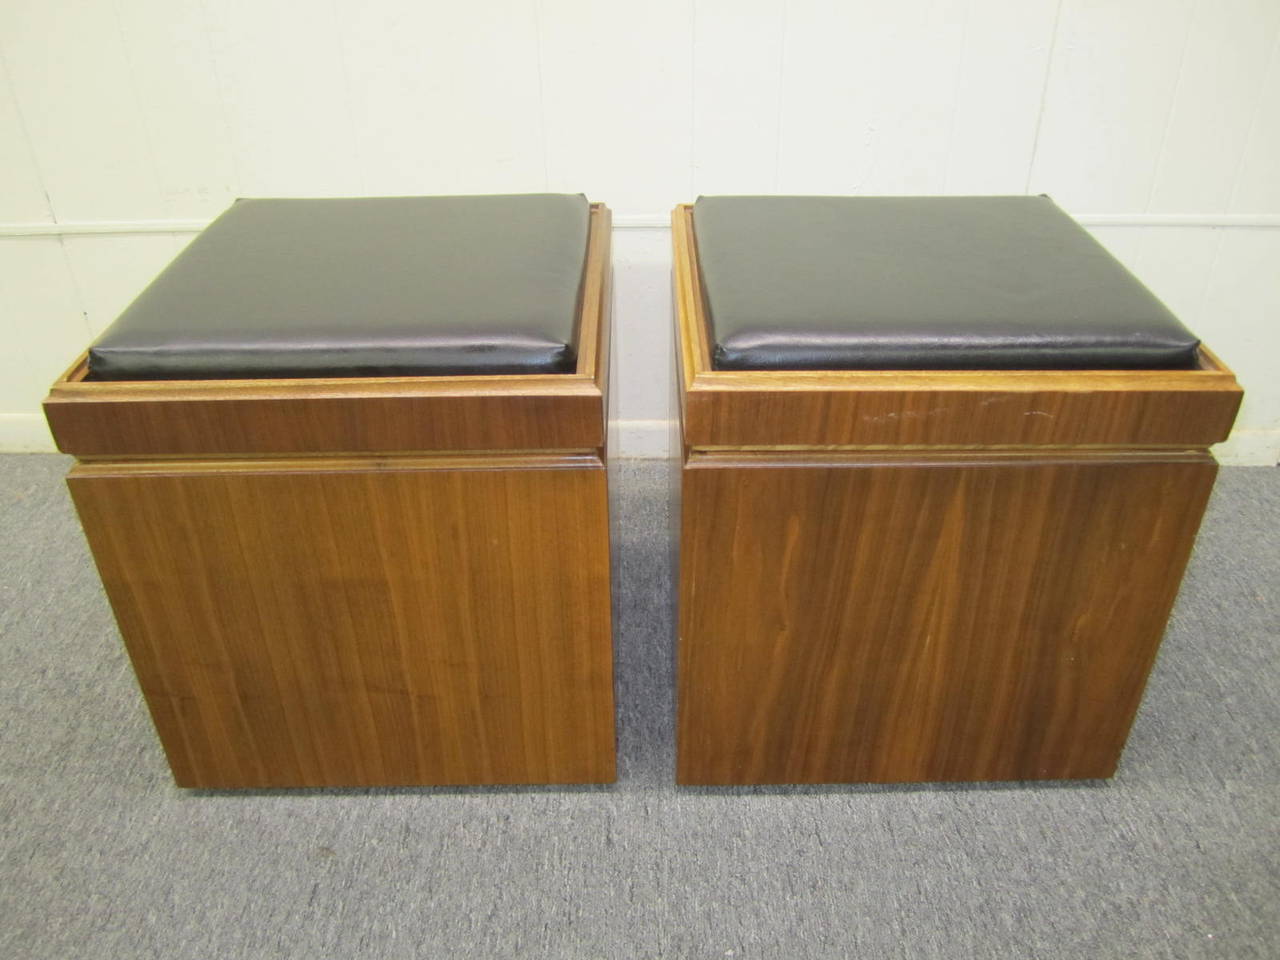 Very unusual pair of Lane rolling chess board storage stools. You will love the great flip top stool/chess board seats and wonderful storage underneath the removable top. There are small rollers on the bottom to allow them to scoot around.